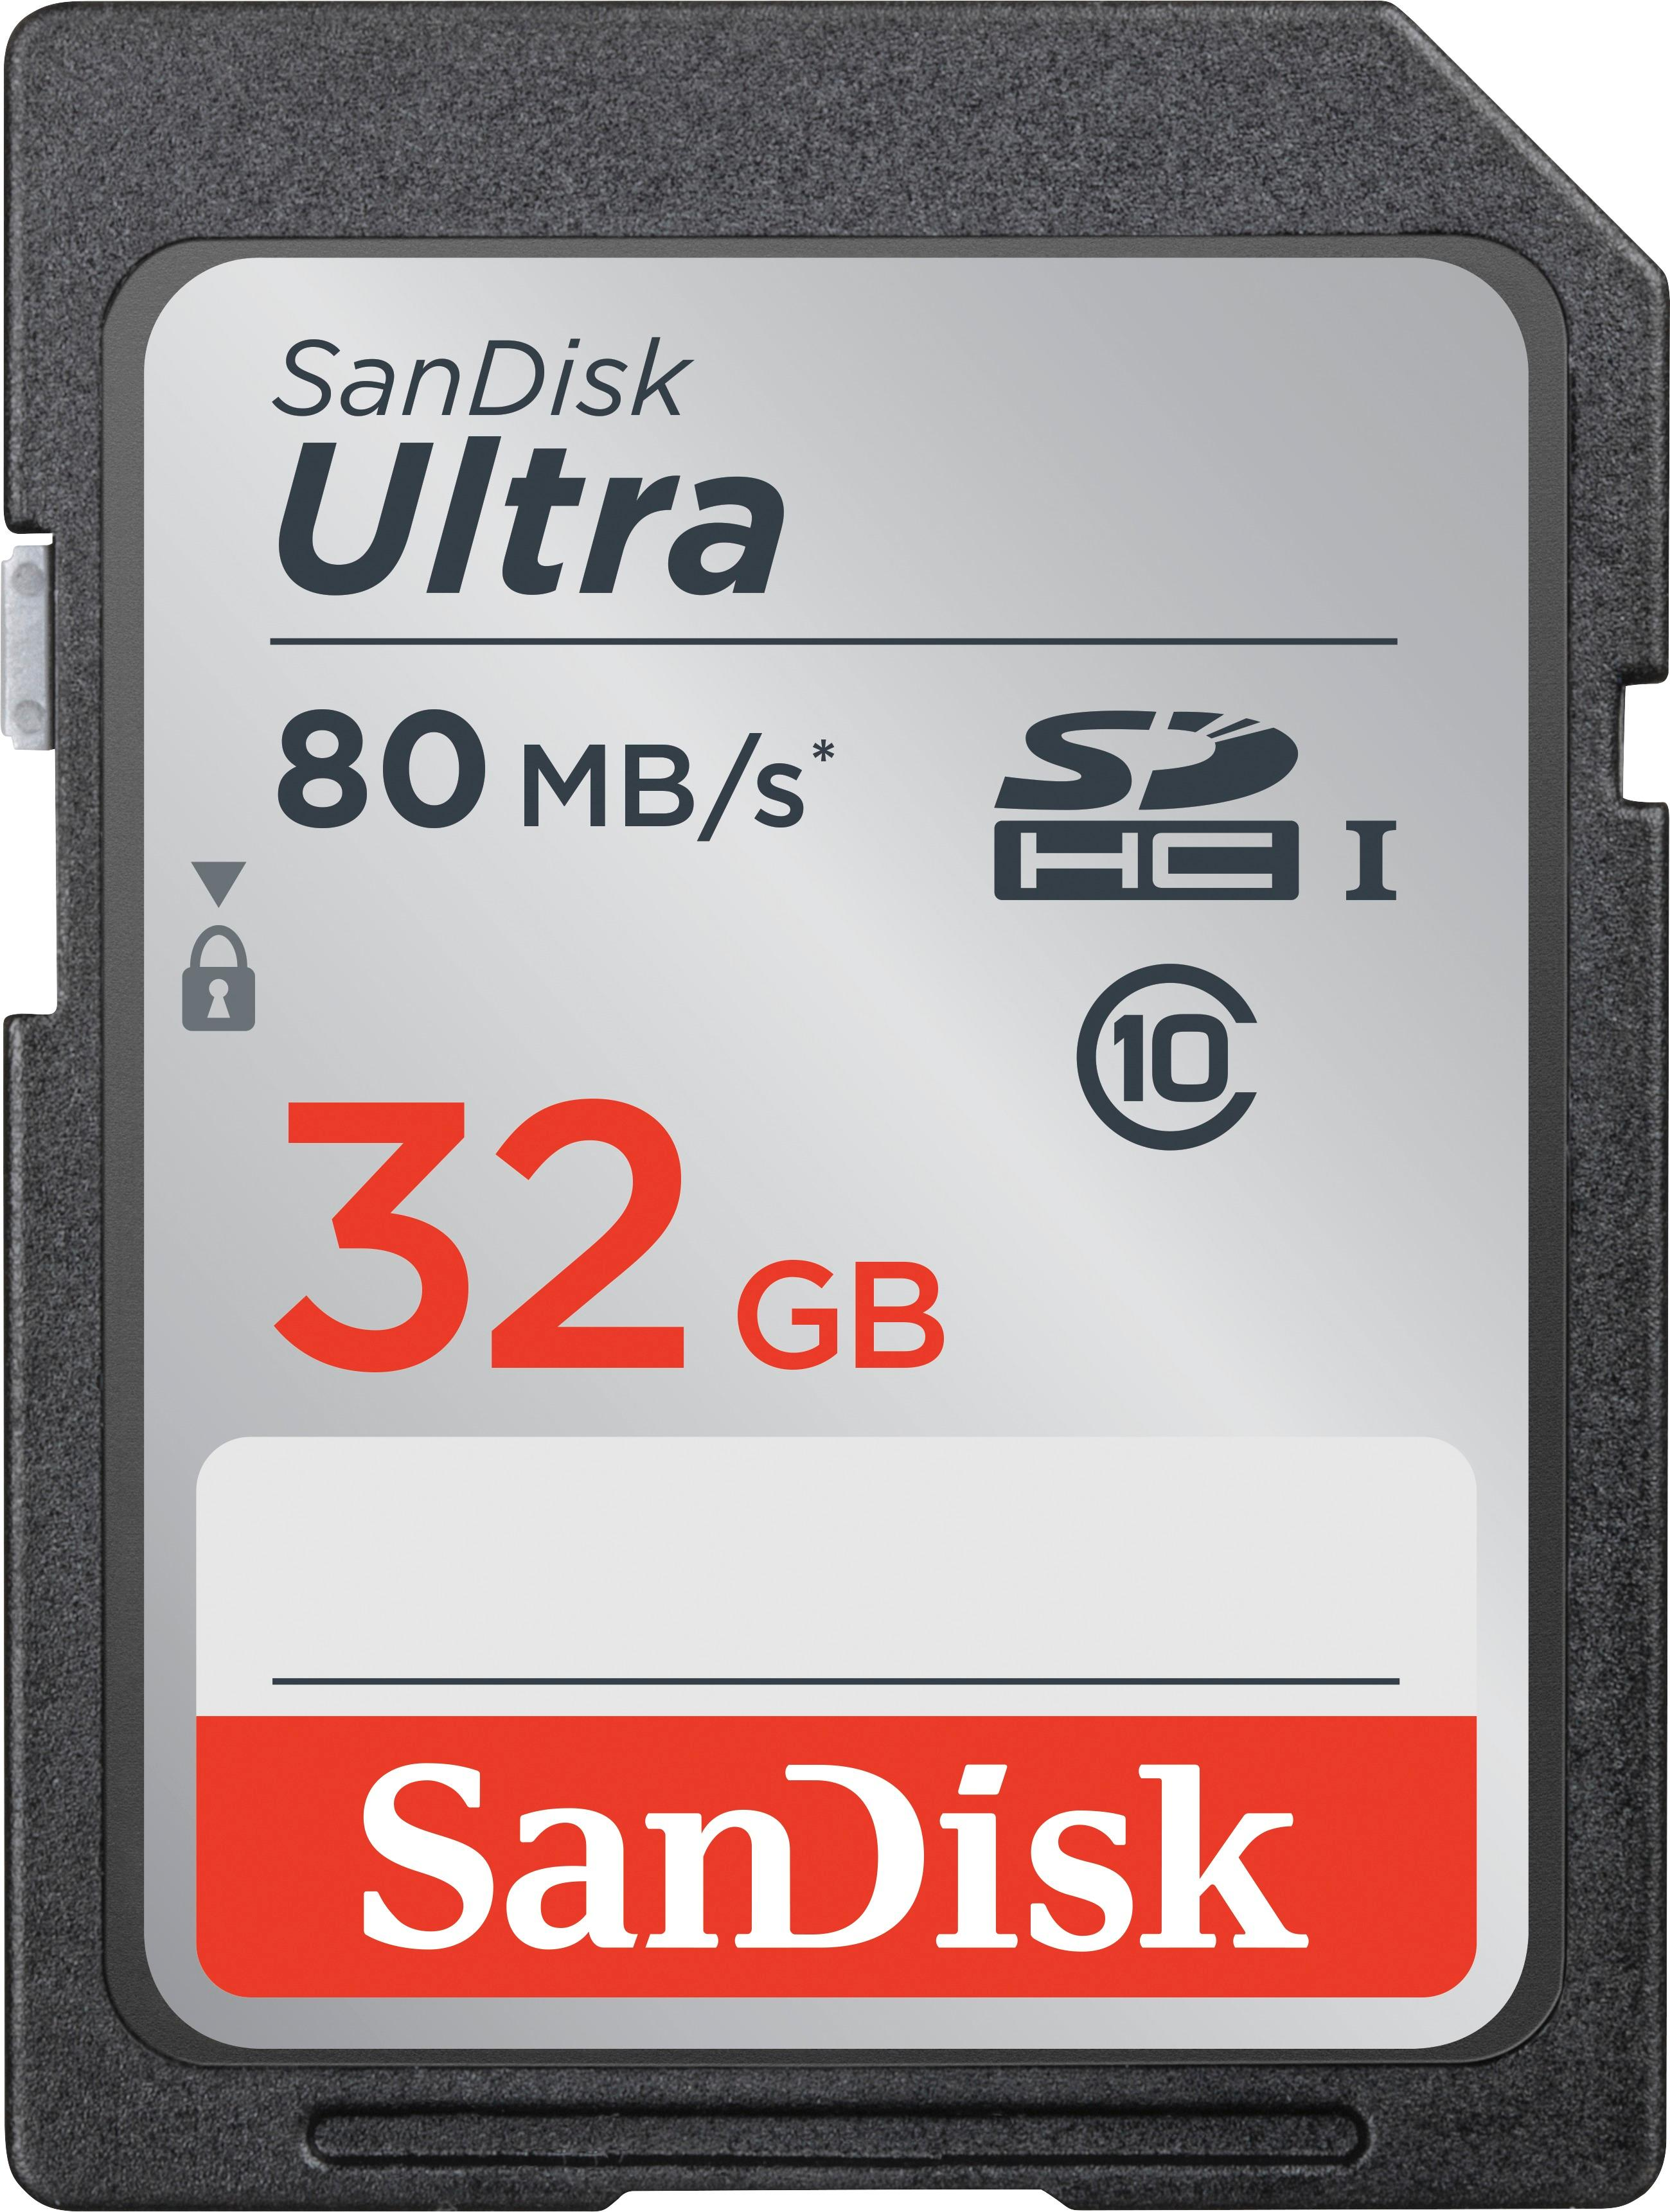 SanDisk 32GB Ultra SDHC UHS-I Memory Card Class 10, 80 MB/s